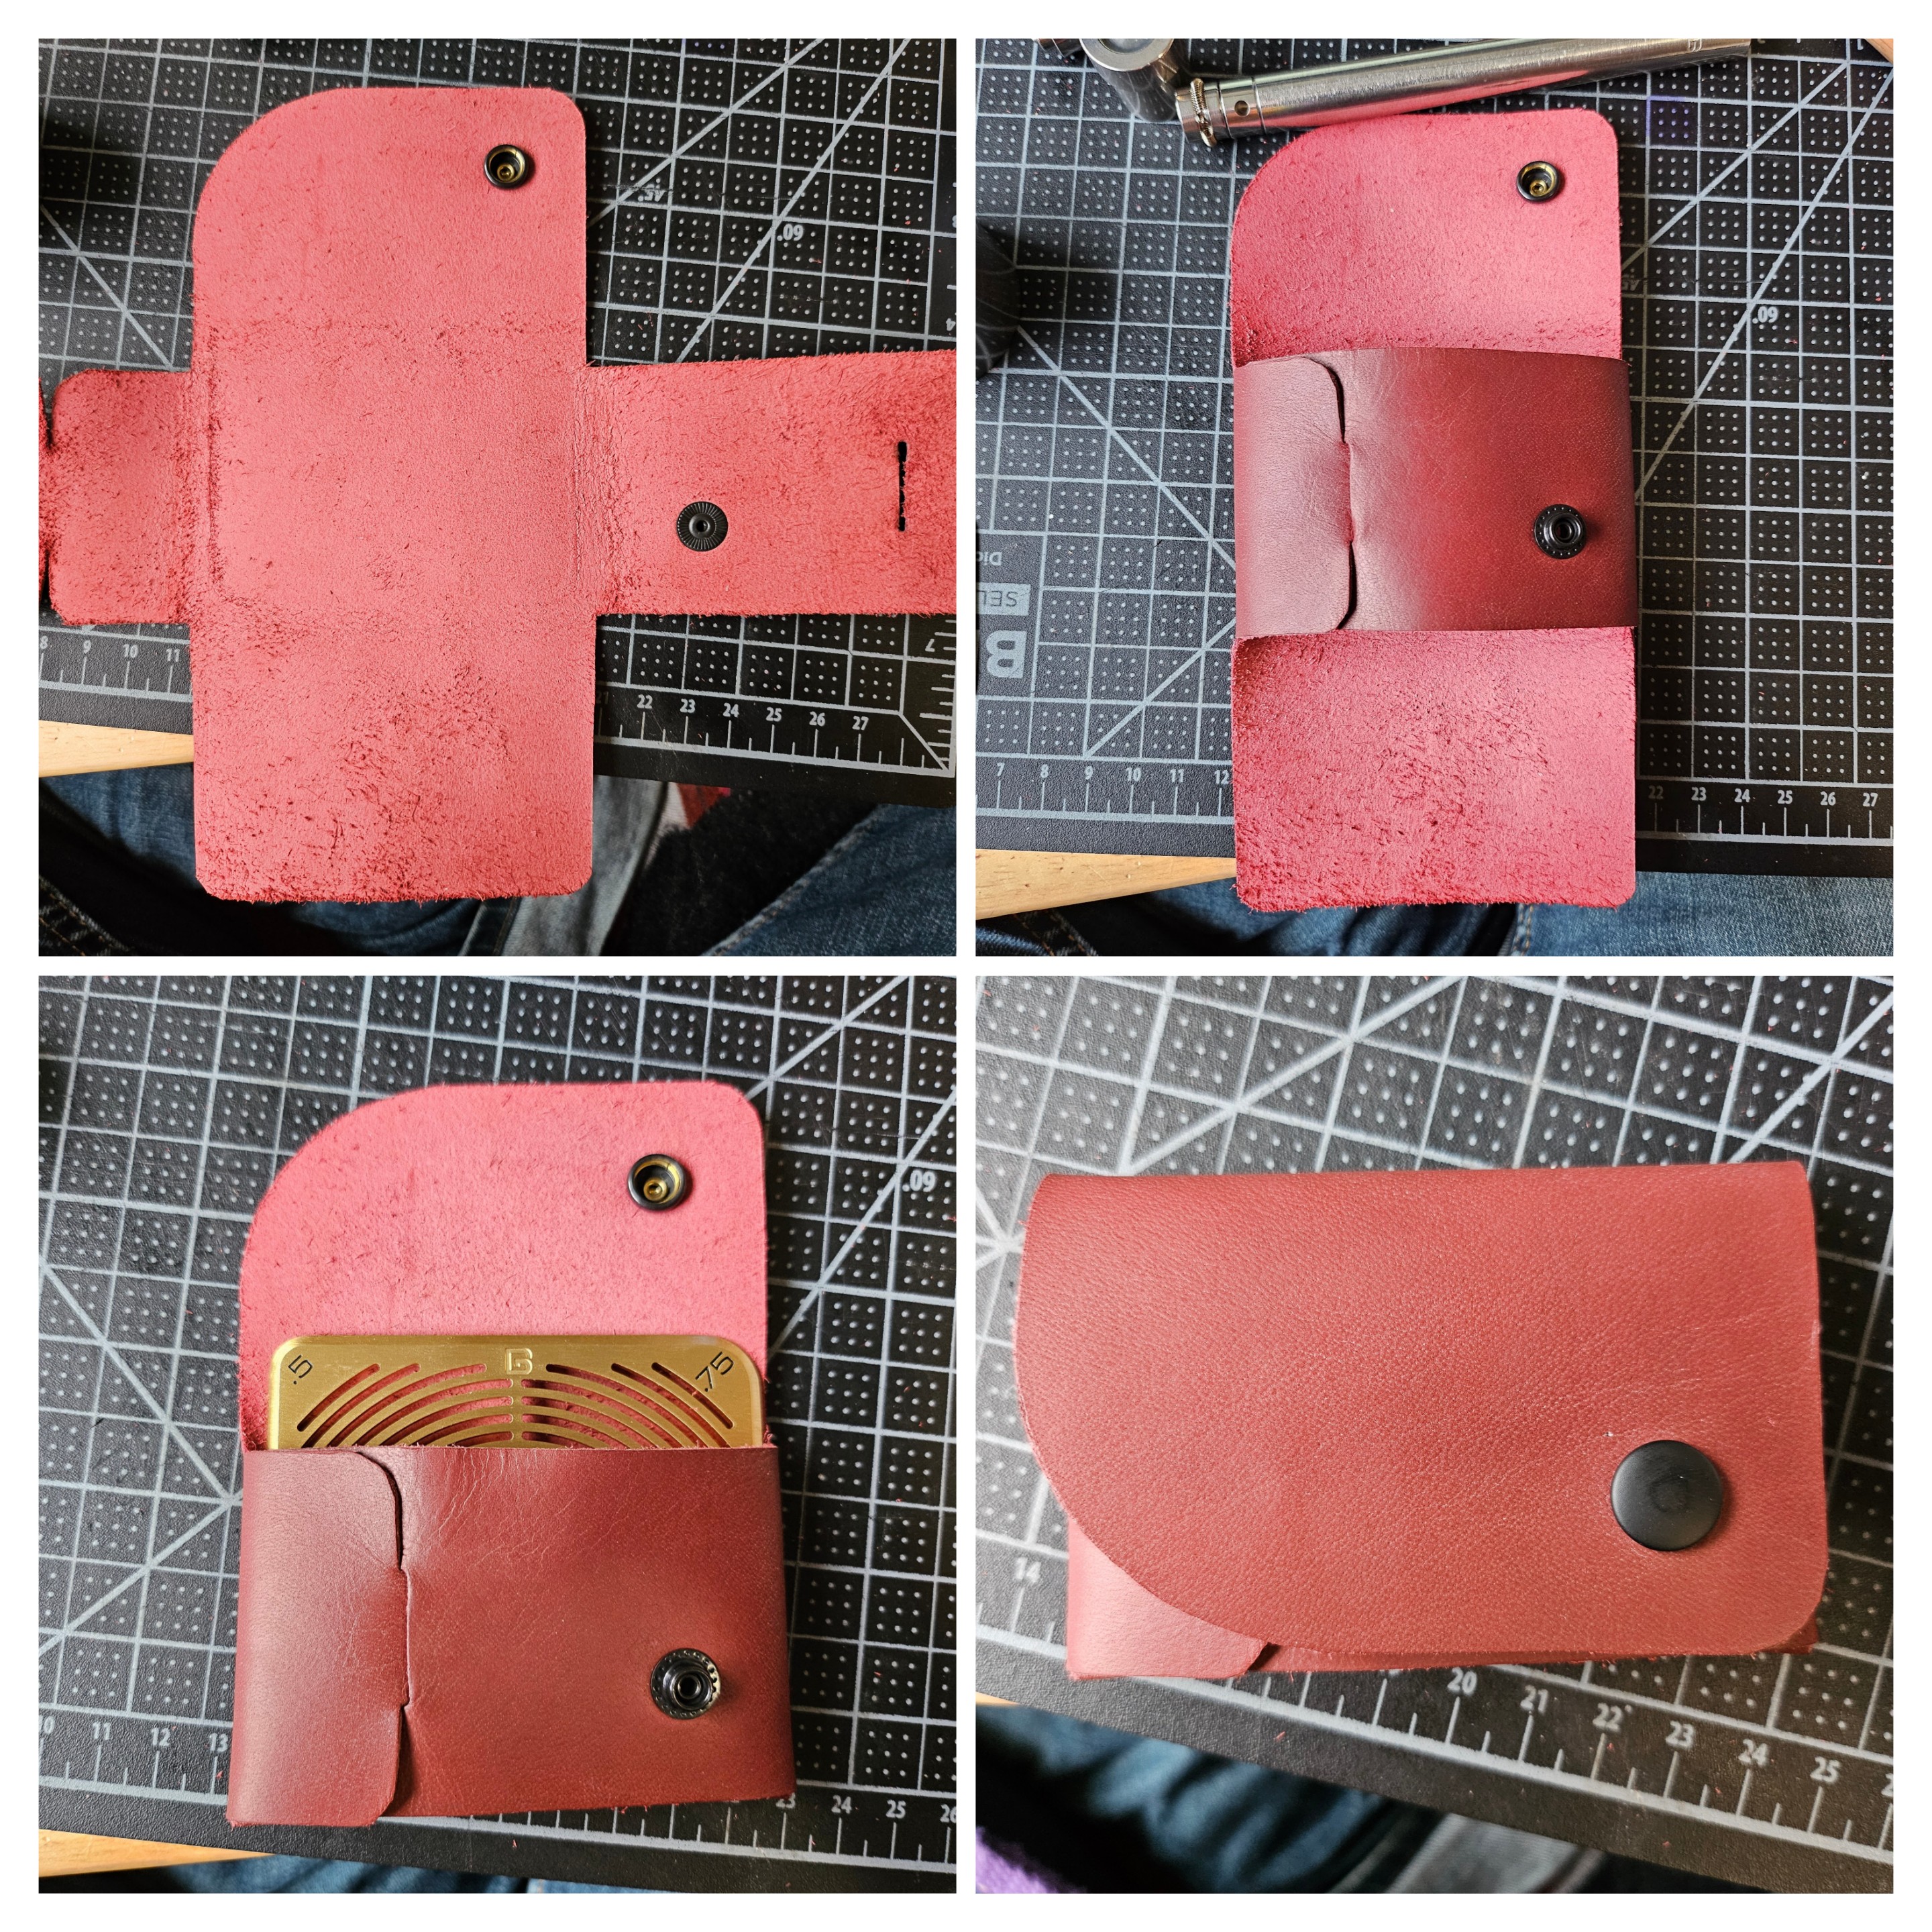 A four part collage showing a single piece of deep red leather folding up to become a card wallet.